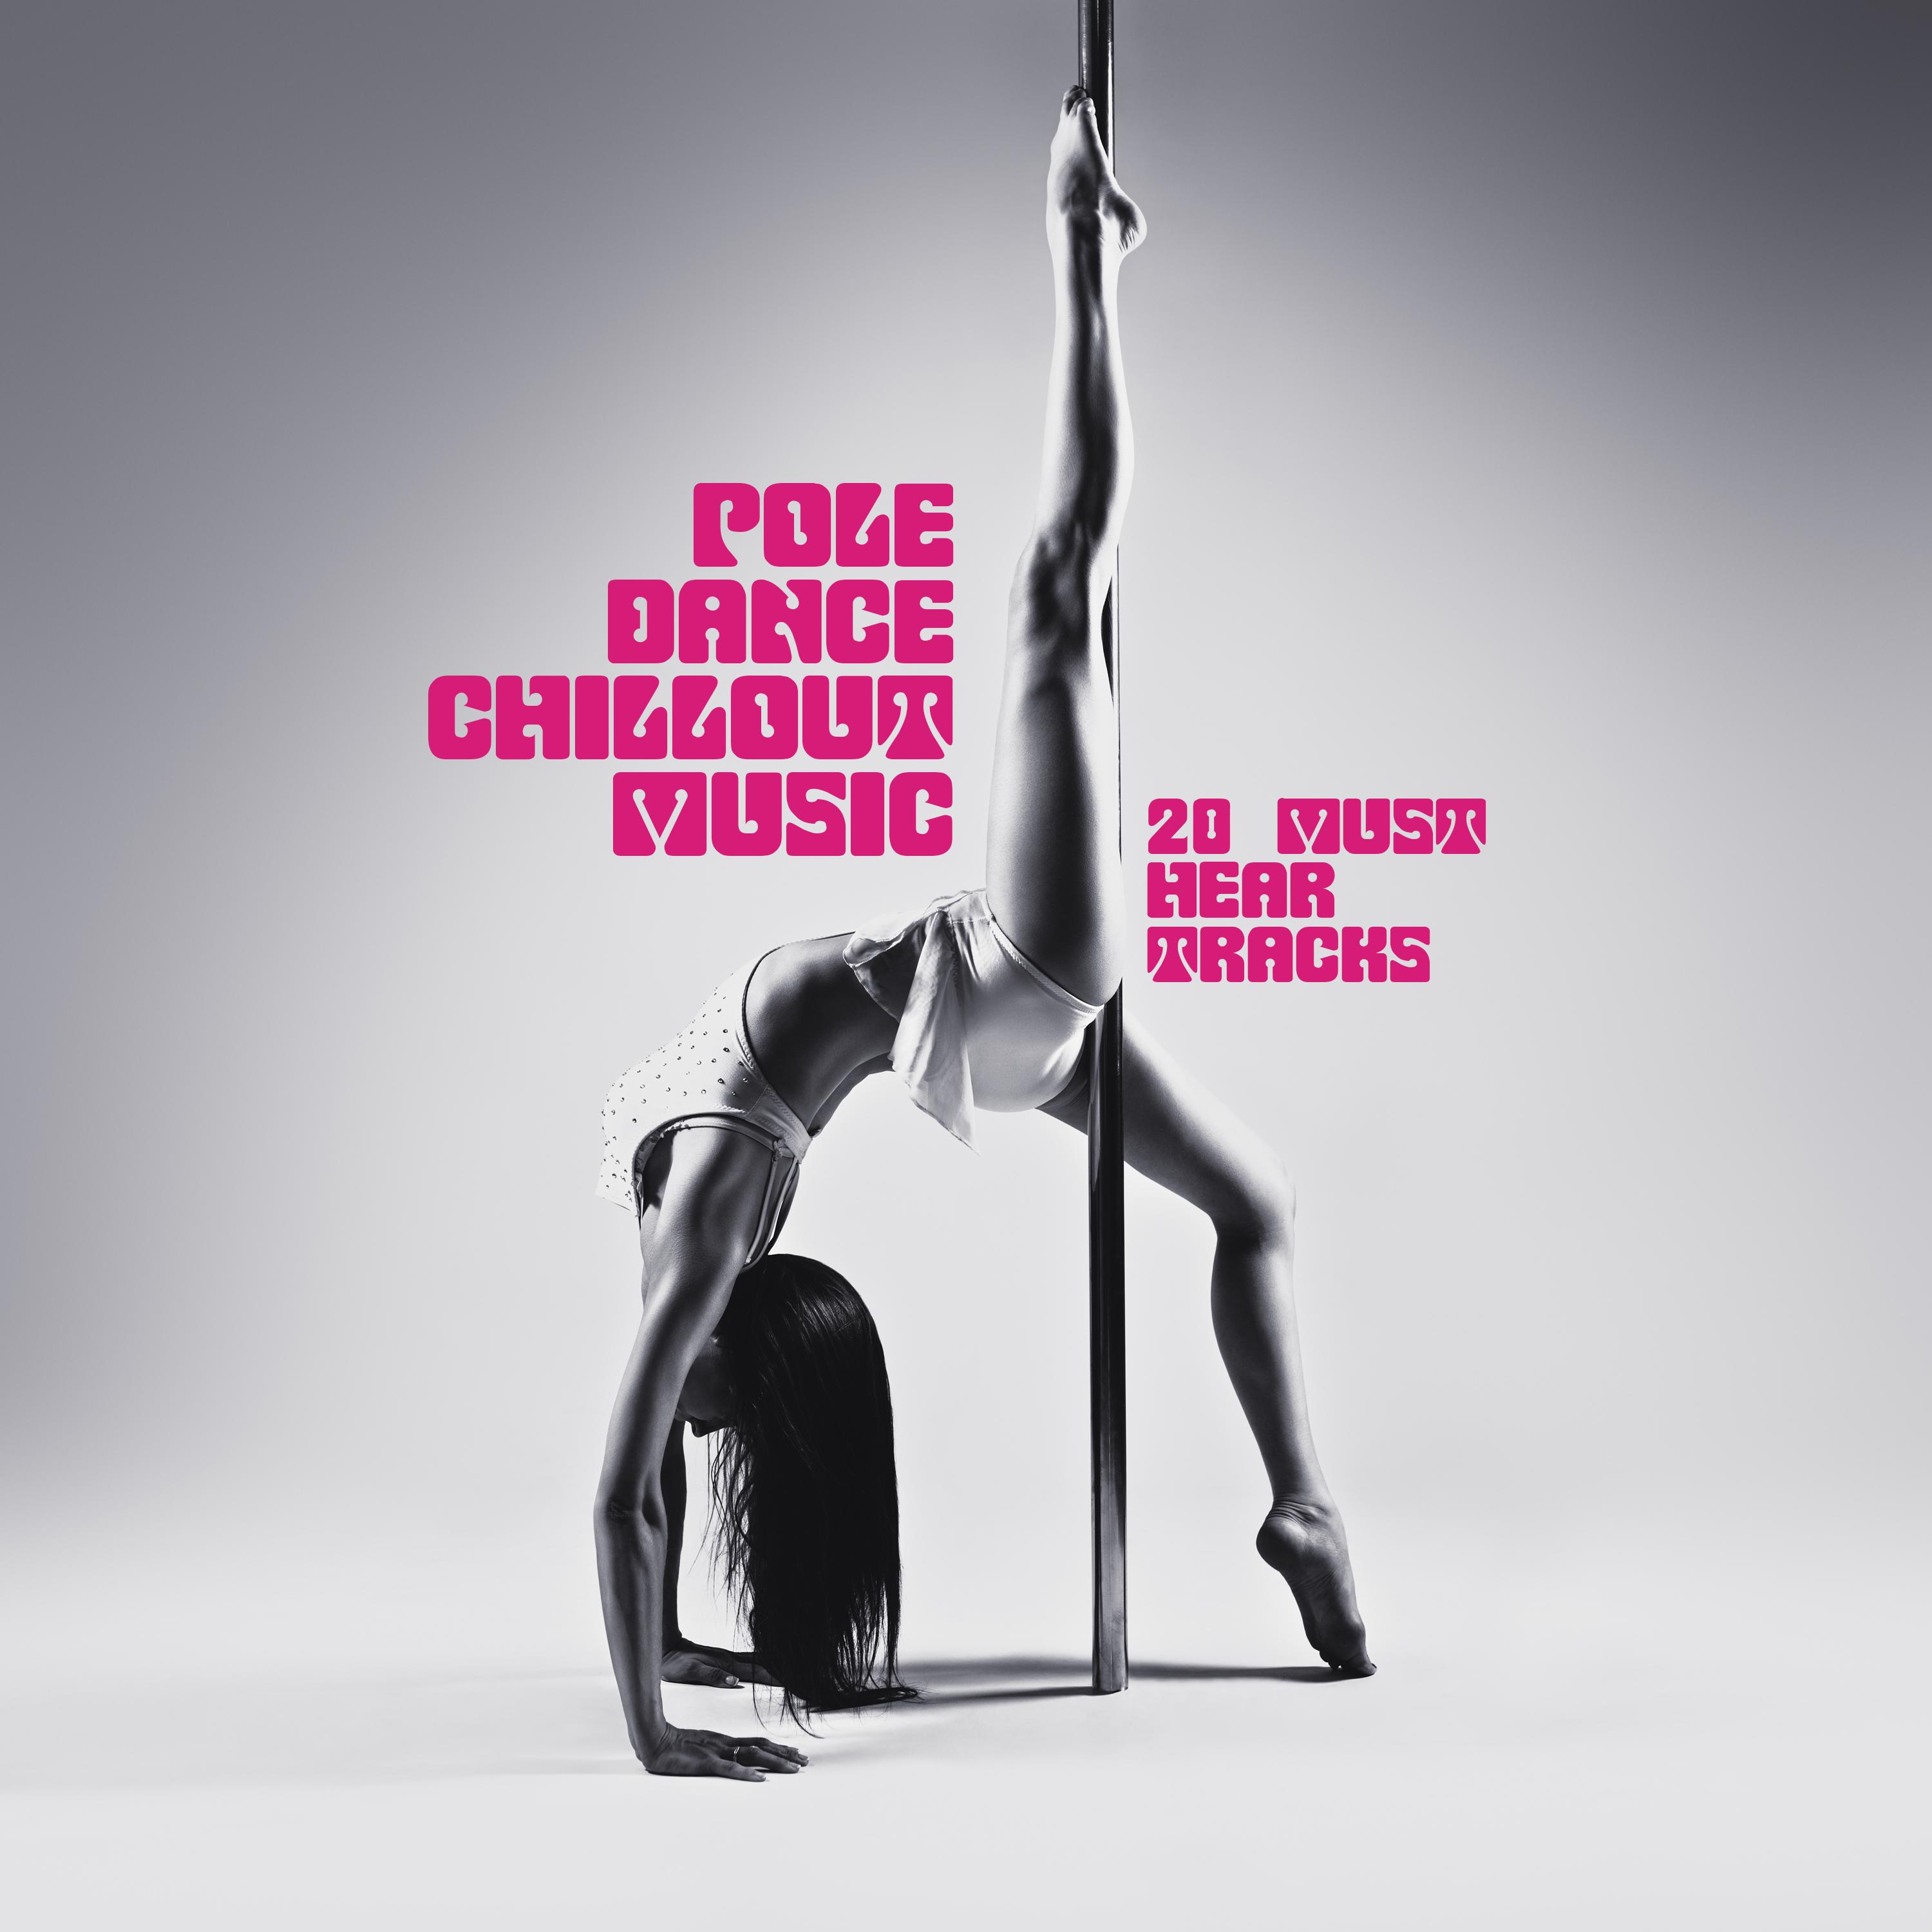 Pole Dance Chillout Music (20 Must Hear Tracks, Sensual Tantra & Pilates, Private Dance & Fly Yoga, Light Erotic Chill)